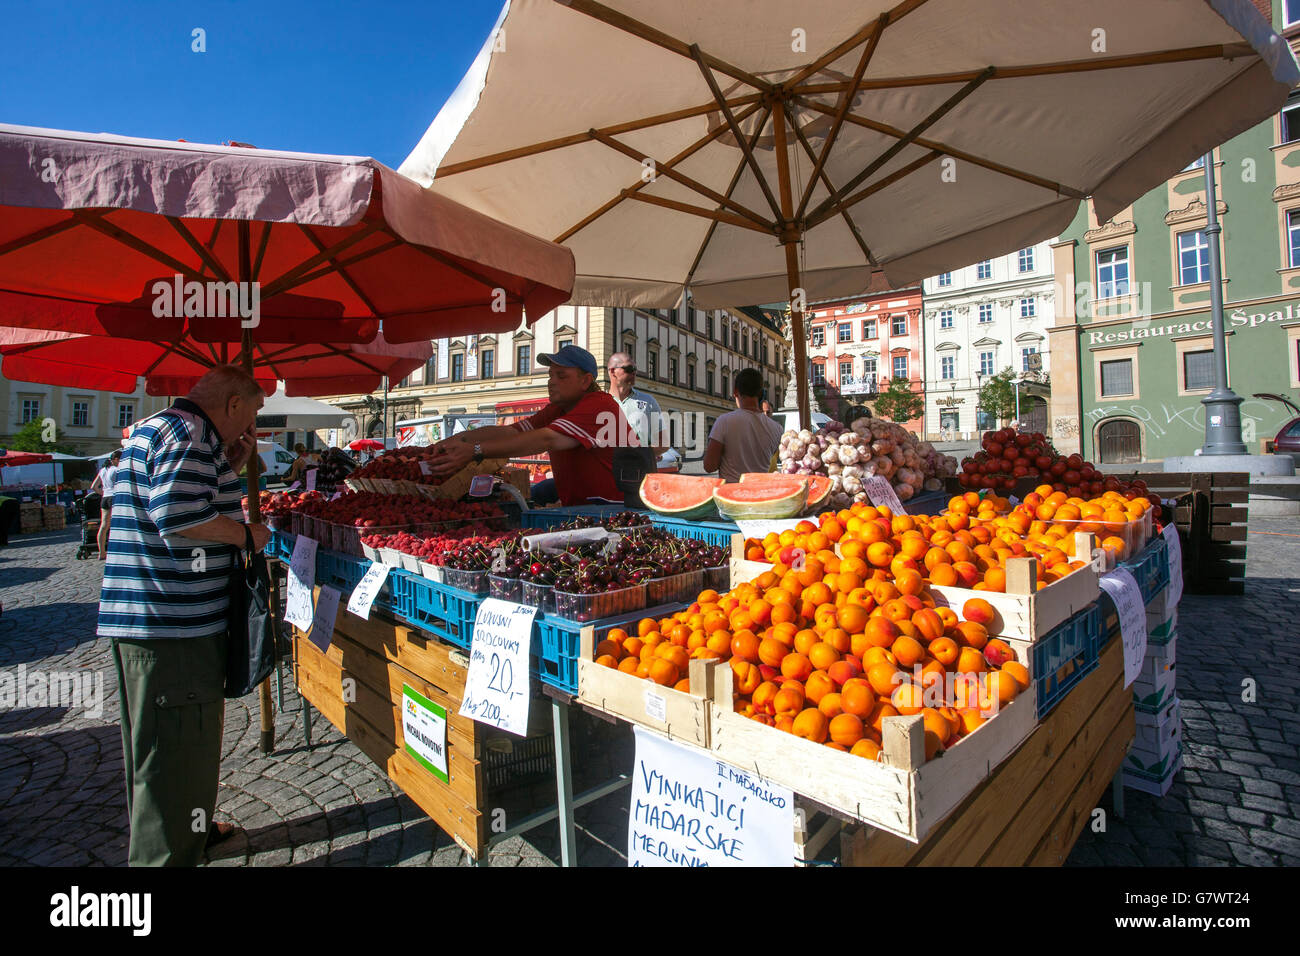 Zelny trh - square, Cabbage Market square is traditional markets with fruits, vegetables, and flowers. Brno, South Moravia, Czech Republic Stock Photo